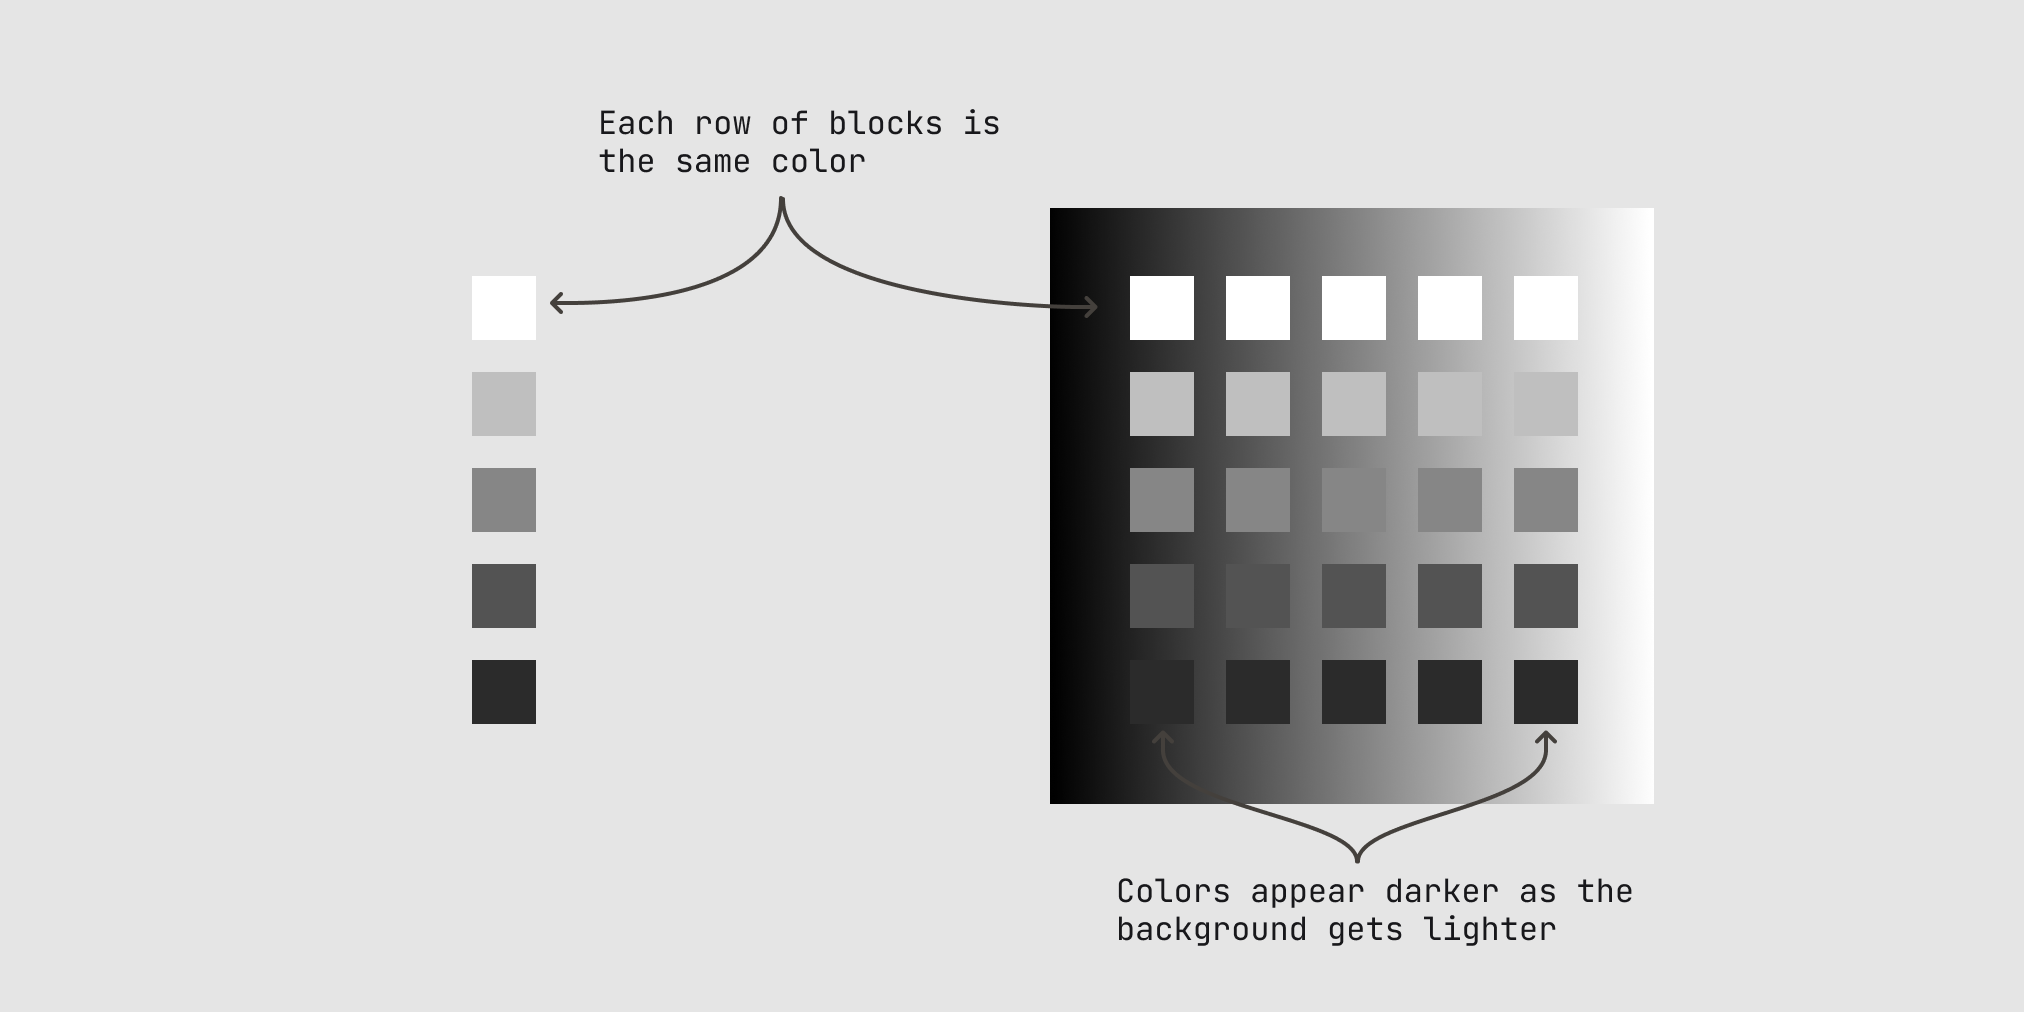 A visual illusion demonstrating how we perceive grey blocks as darker when the background behind them is lighter.